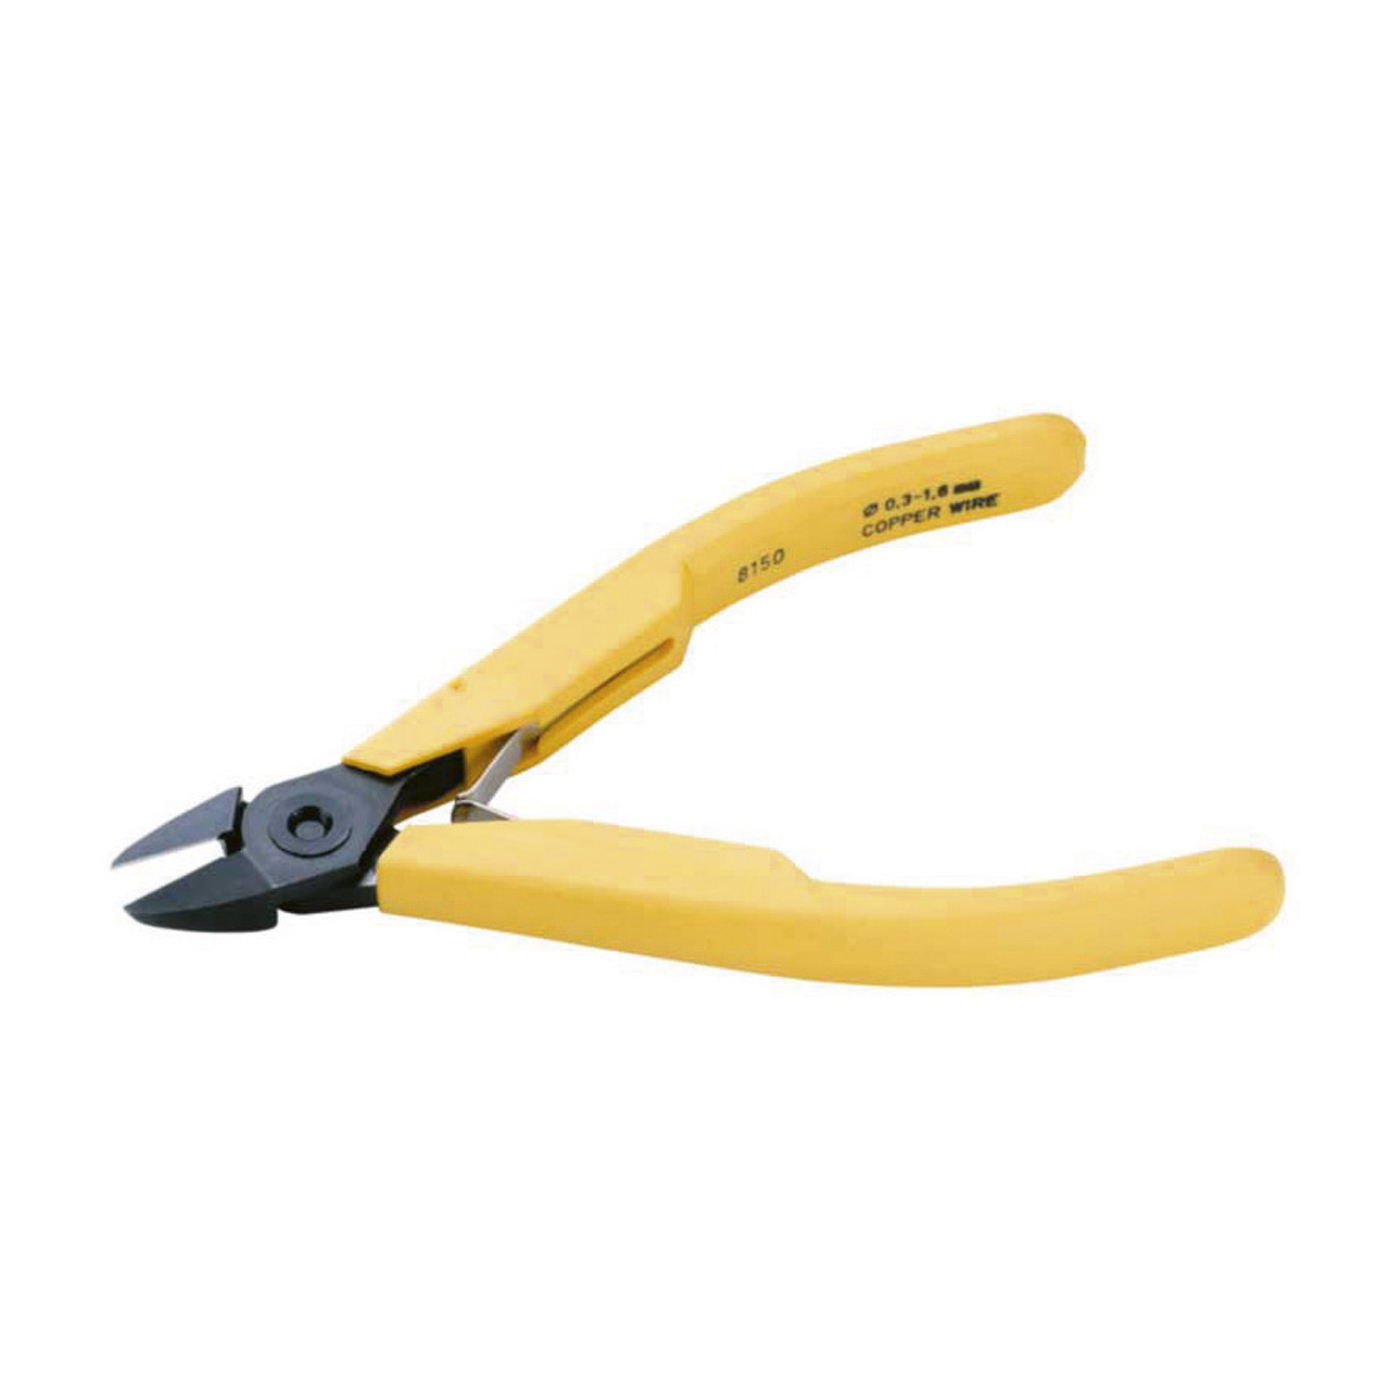 Wire Cutter 8150, Micro-Bevel, Oval, 112.5 mm - 1 piece